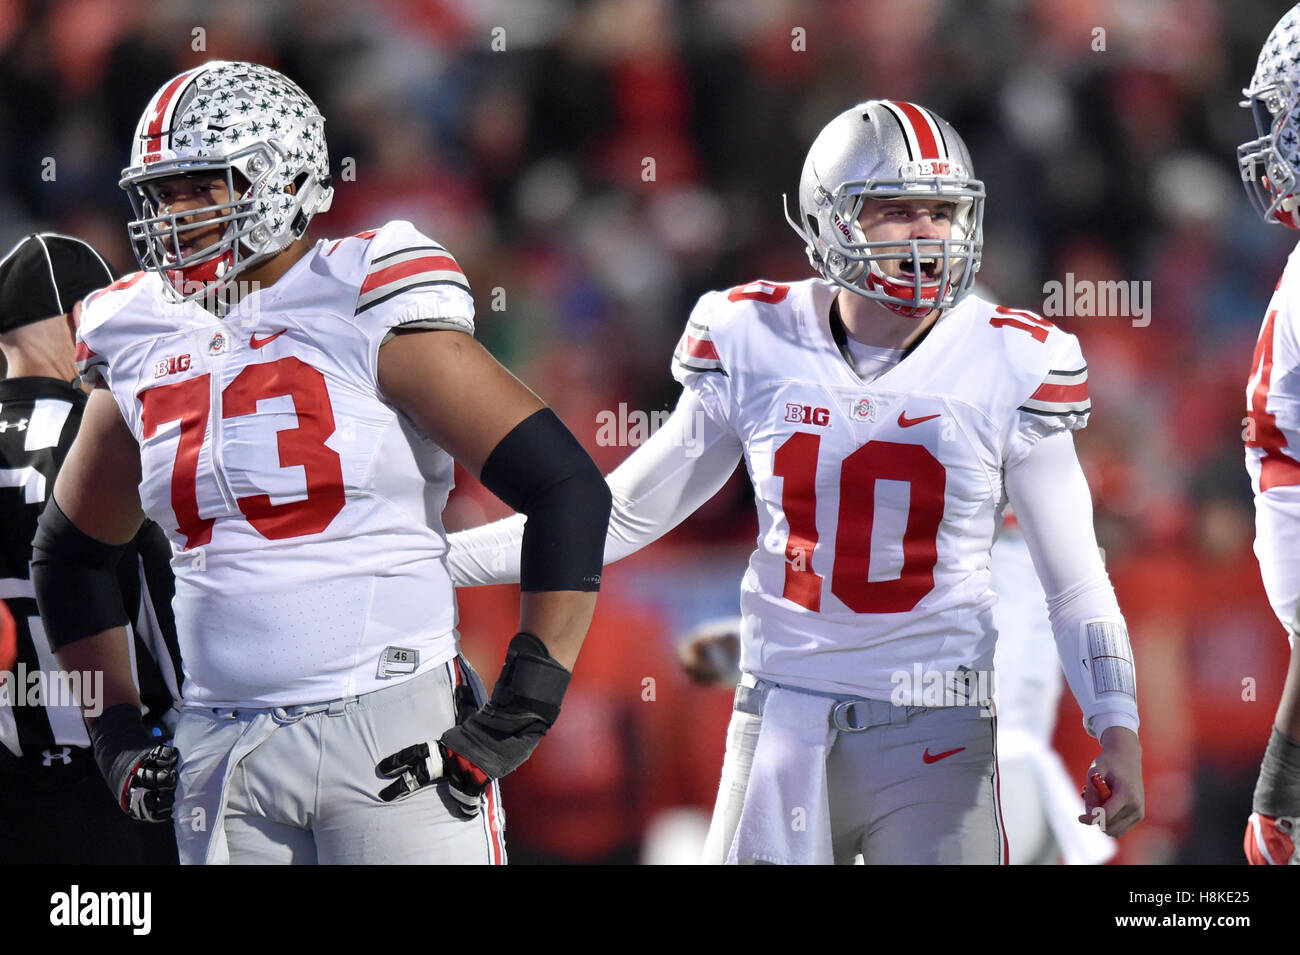 College Park, Maryland, USA. 12th Nov, 2016. Ohio State Buckeyes quarterback JOE BURROW (10) gives signals to his line during a game played at Maryland Stadium at College Park, MD. Ohio State beat Maryland 62-3. © Ken Inness/ZUMA Wire/Alamy Live News Stock Photo